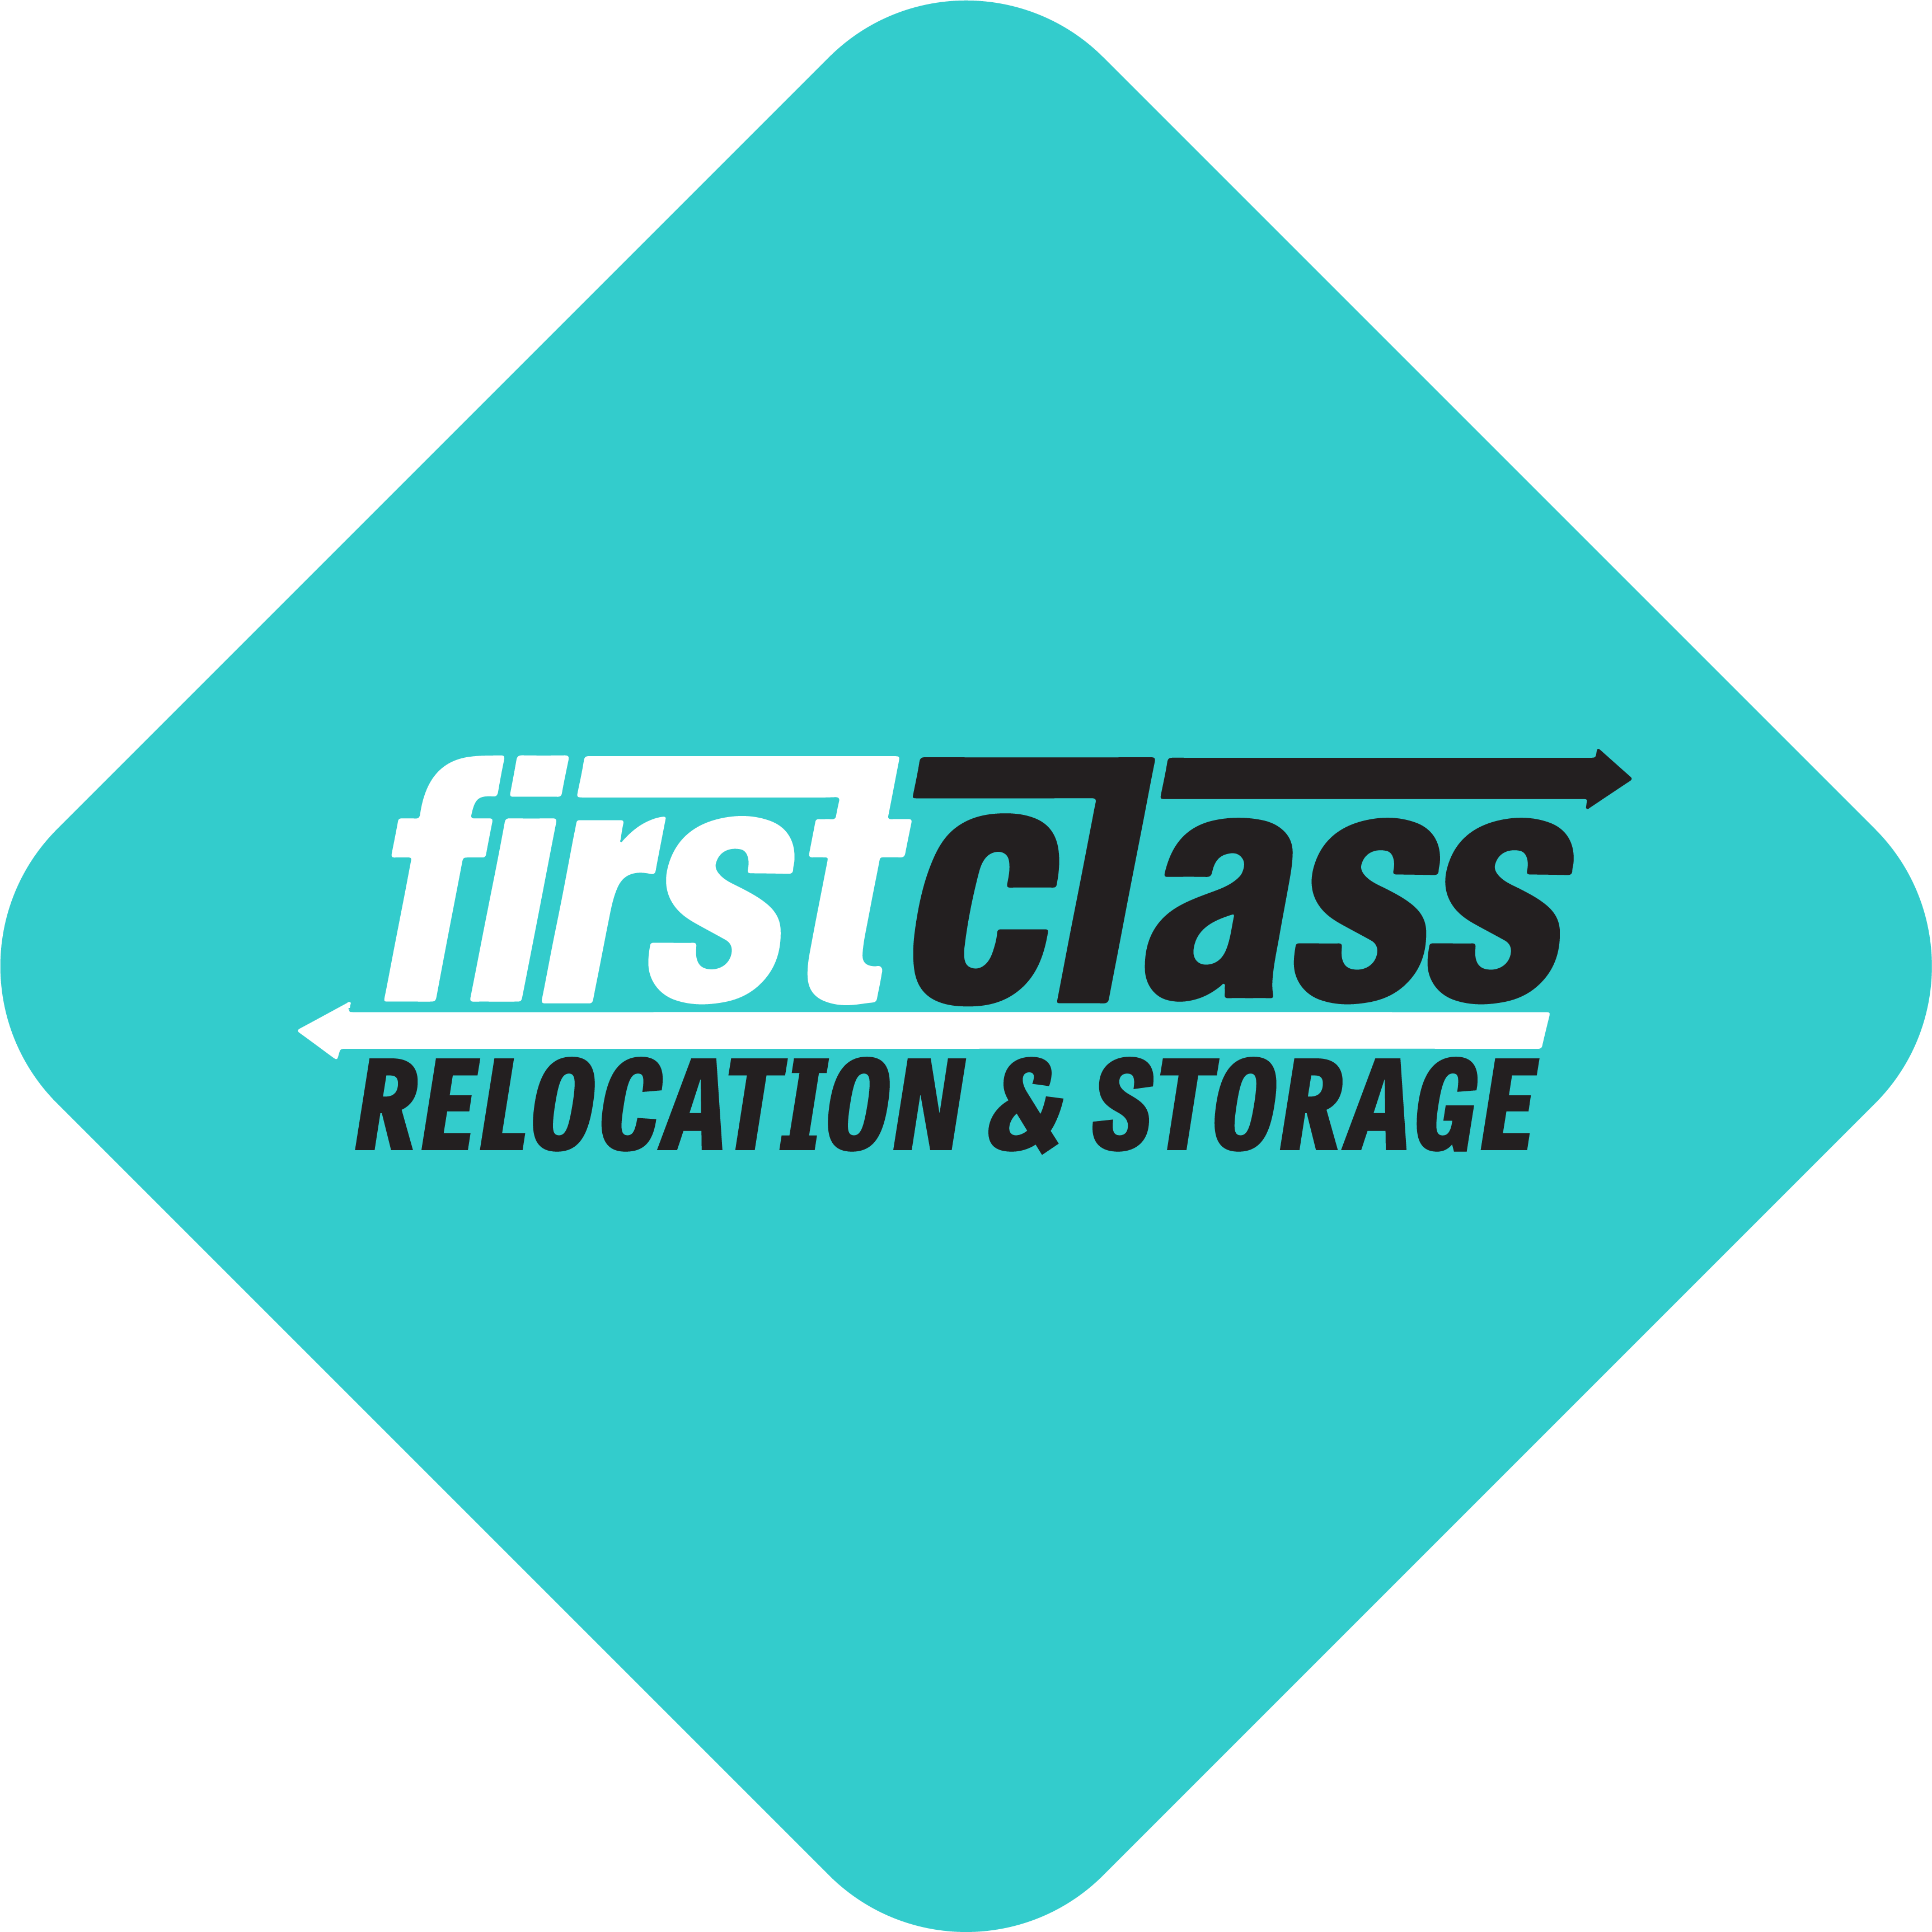 First Class Relocation & Storage - Austin TX, Local and Long Distance Moving Company